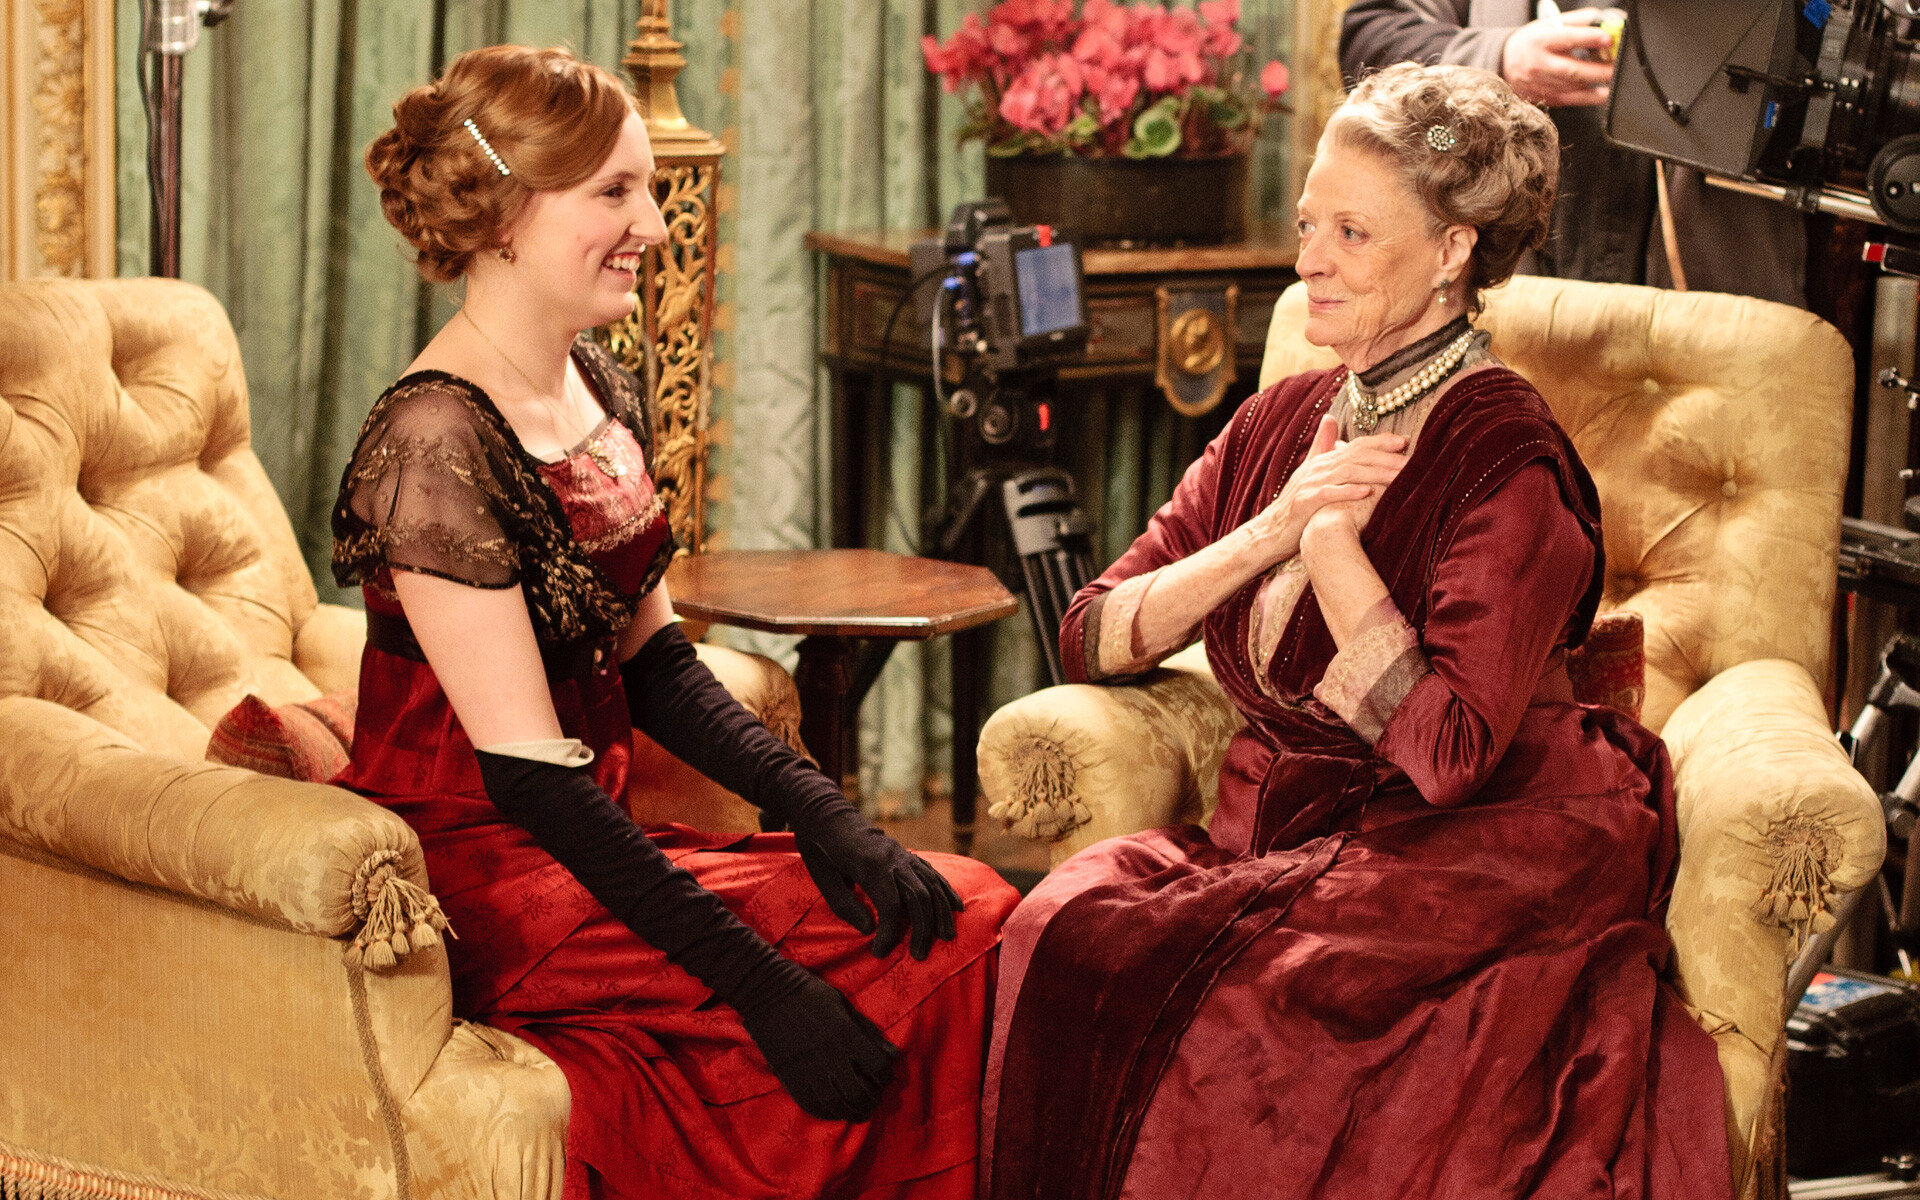 Downton Abbey: Maggie Smith and Laura Carmichael on set. 1920x1200 HD Wallpaper.